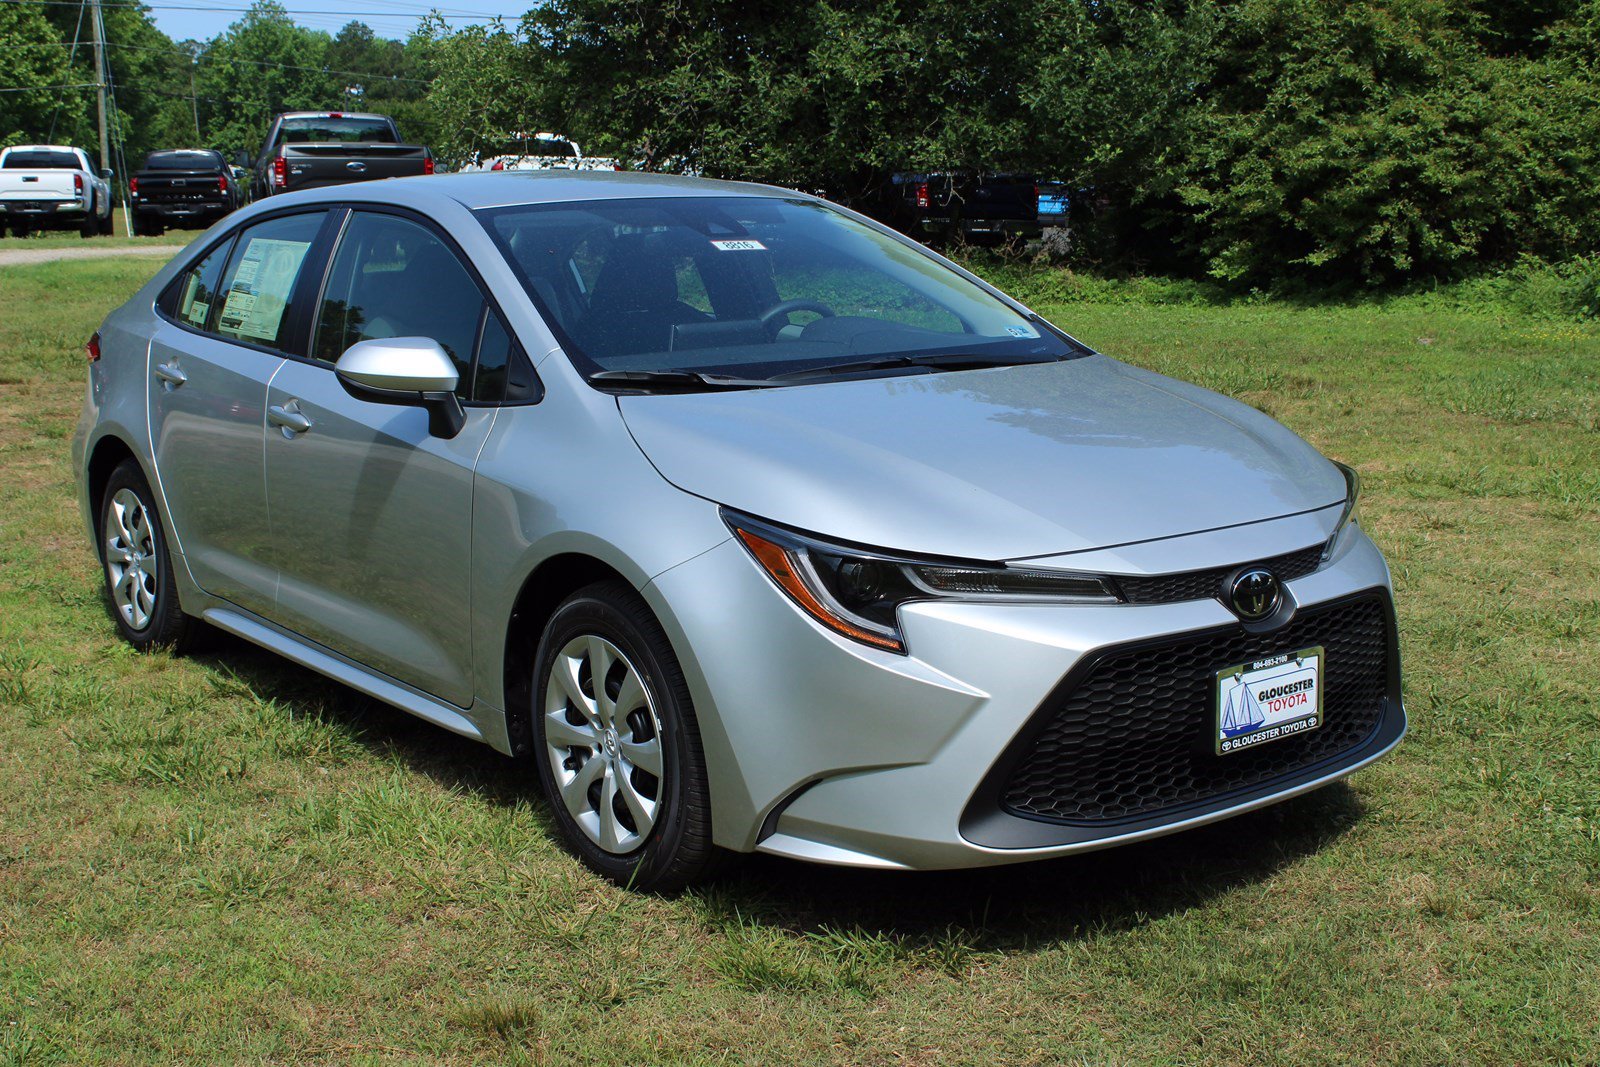 New 2020 Toyota Corolla LE 4dr Car in Gloucester 8816